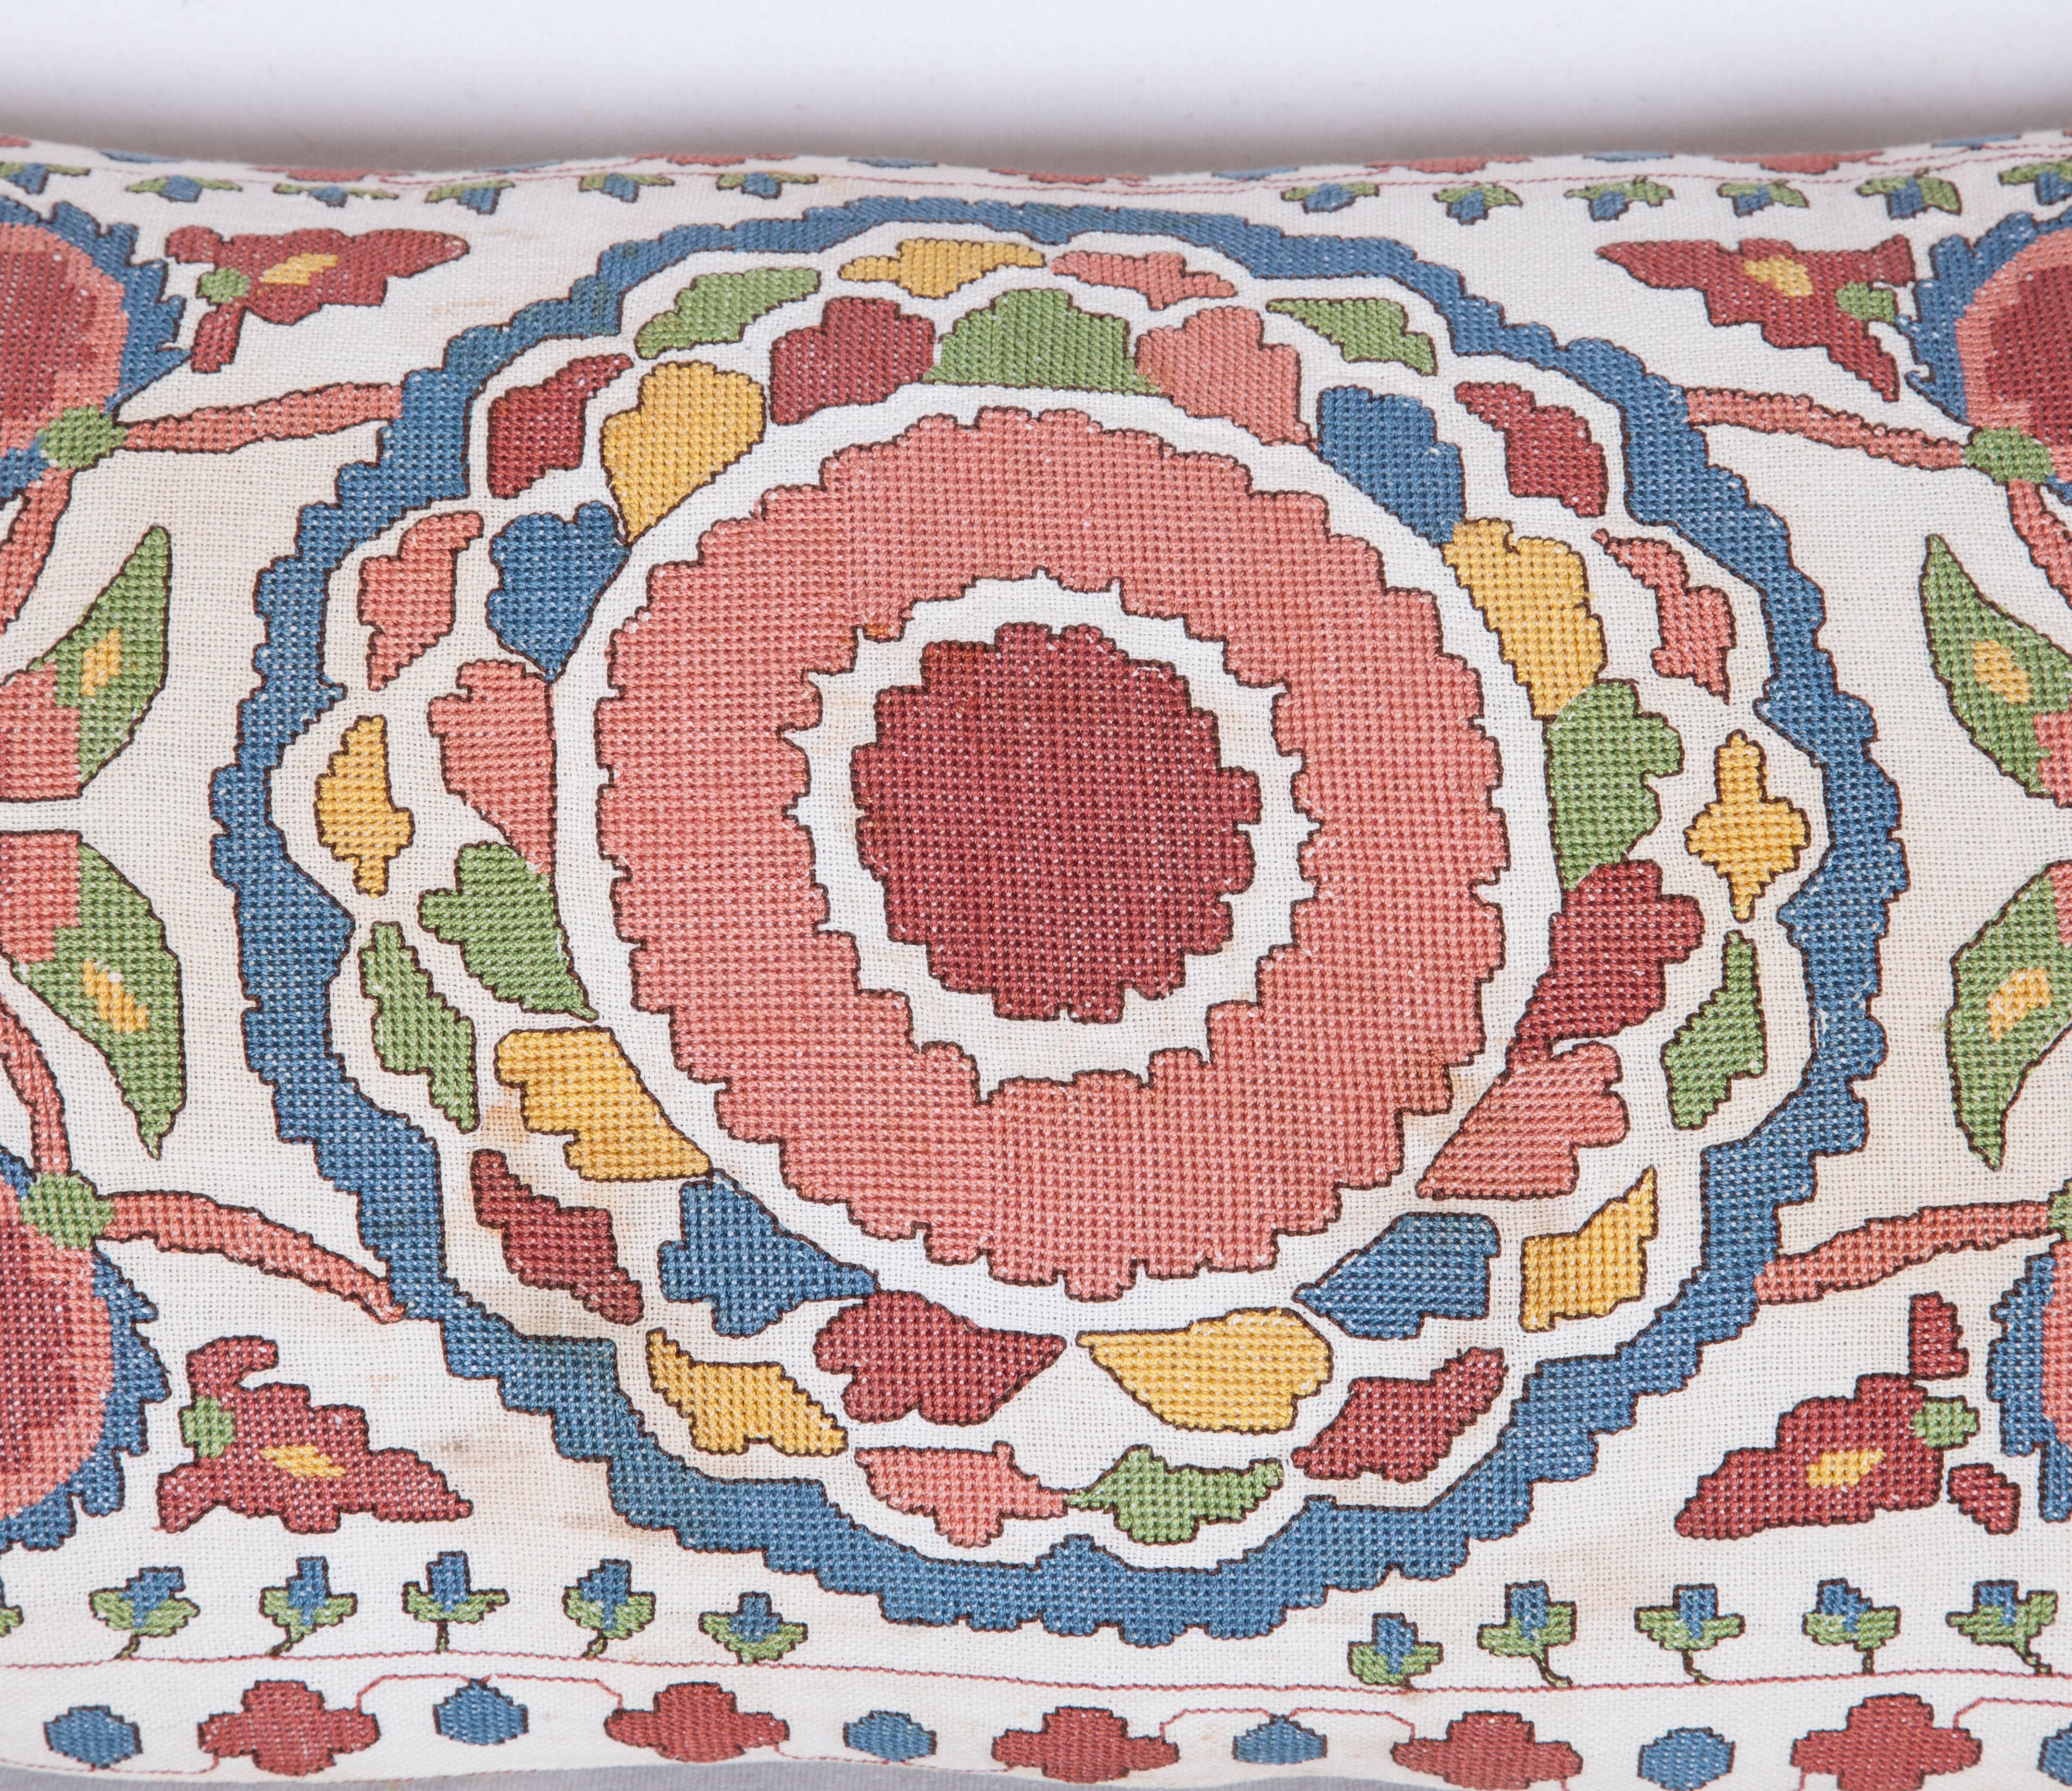 The pillow is made out of an early 20th century. Bulgarian embroidery. It does not come with an insert but it comes with a bag made to the size and out of cotton to accommodate the filling. The backing is made of linen. Please note ' filling is not